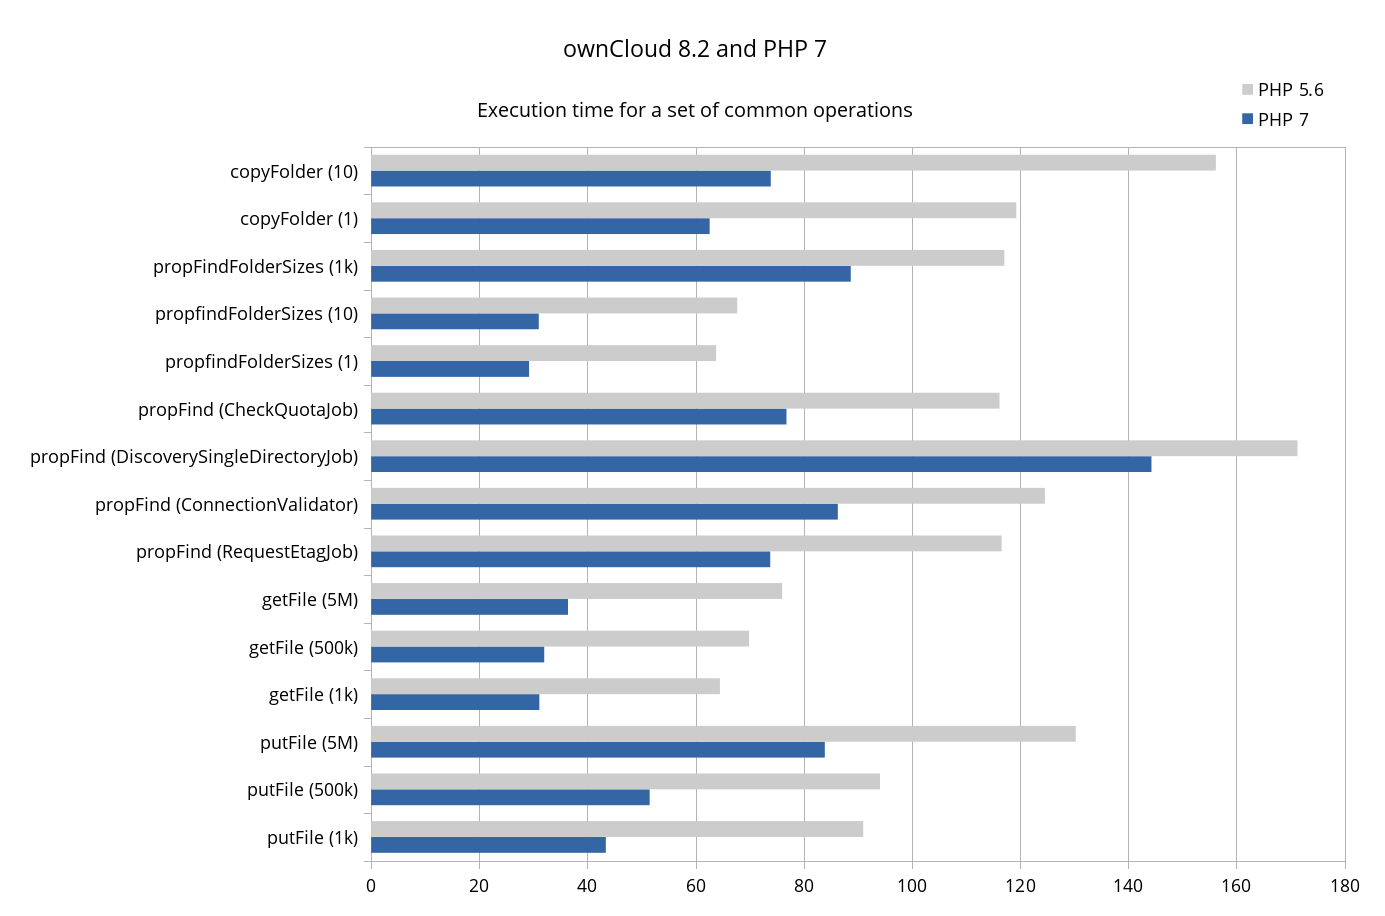 ownCloud performance comparison between PHP 5.6 and 7